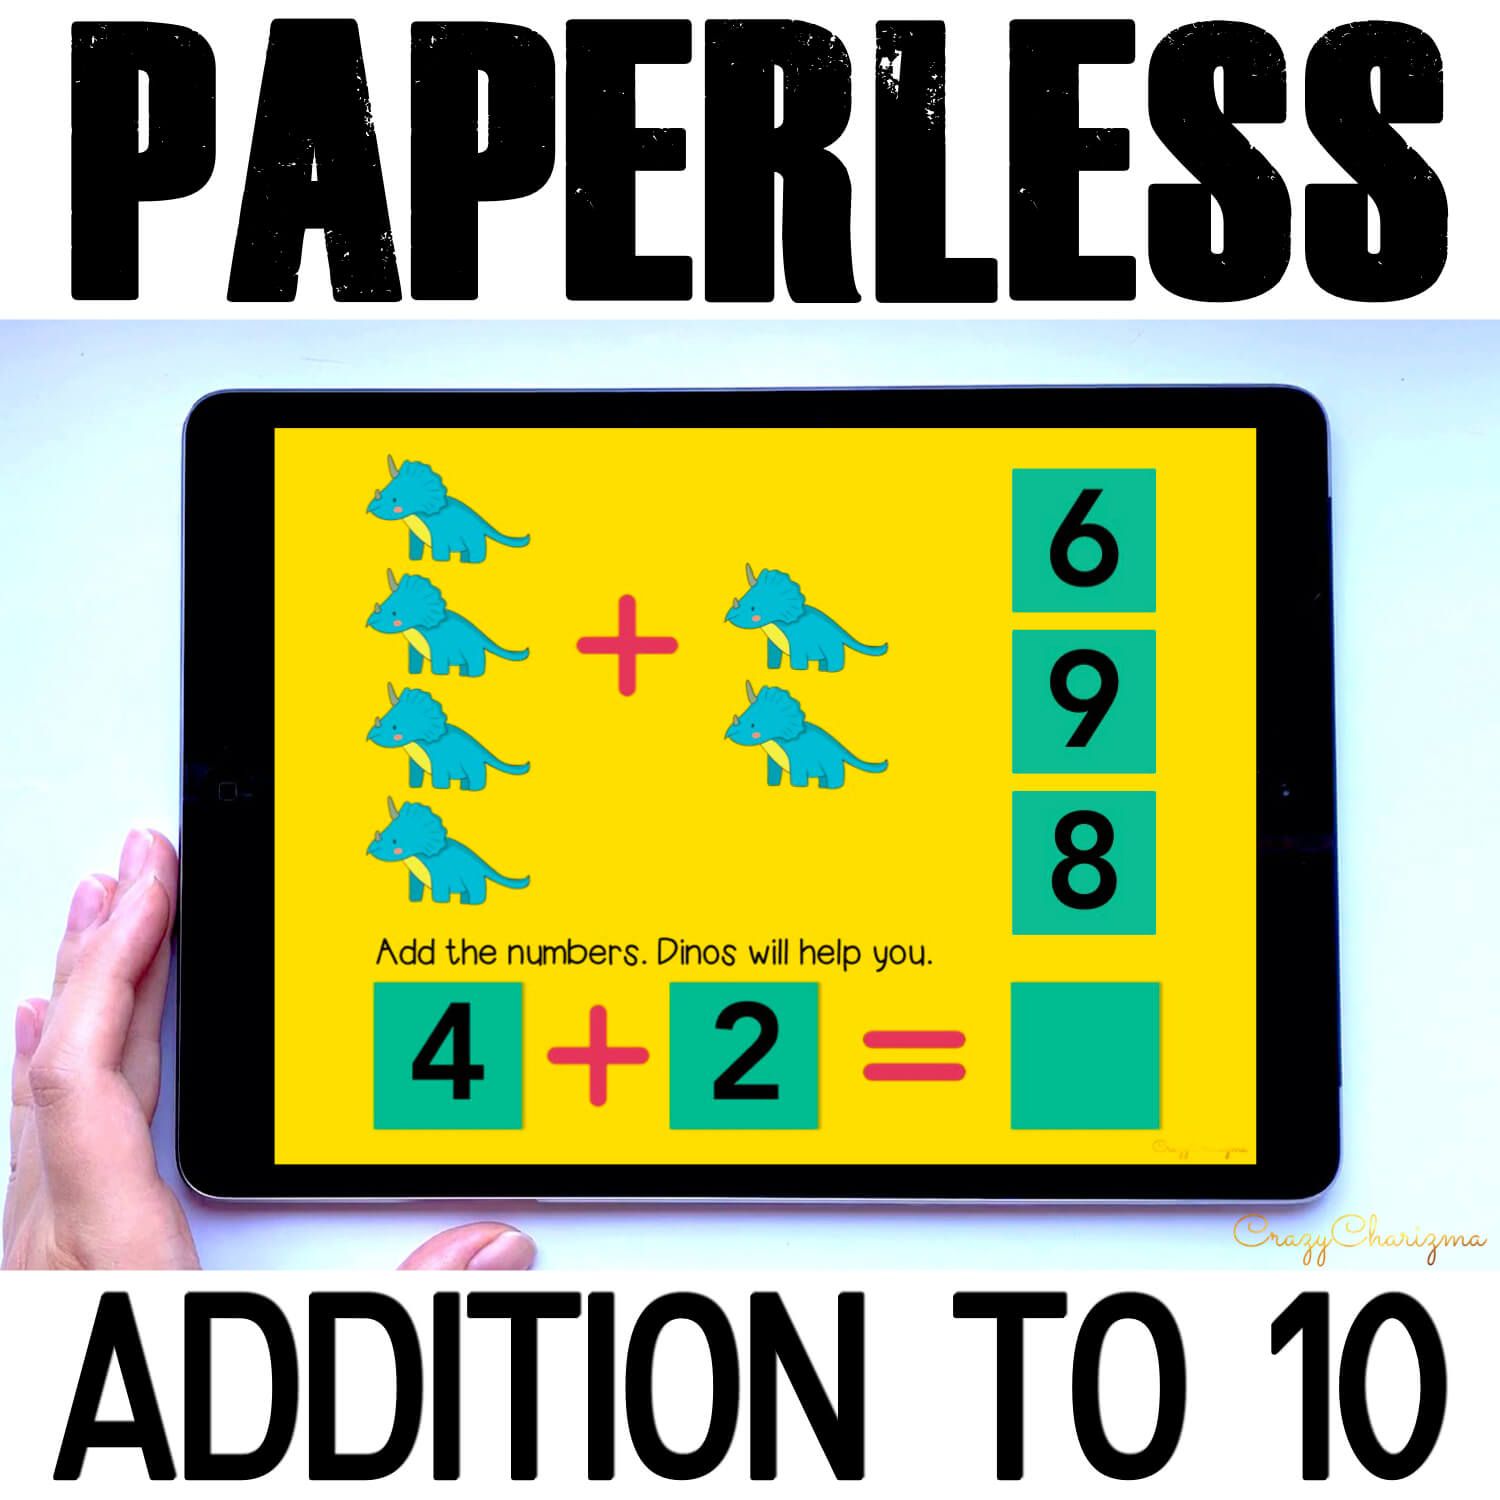 Need engaging Addition to 10 Google Slides practice? Have fun with this math center. Kids will add numbers and drag moveable pieces with the correct answer. Pictures of dinos will help! This paperless set is perfect for Google Classroom and Google Slides.